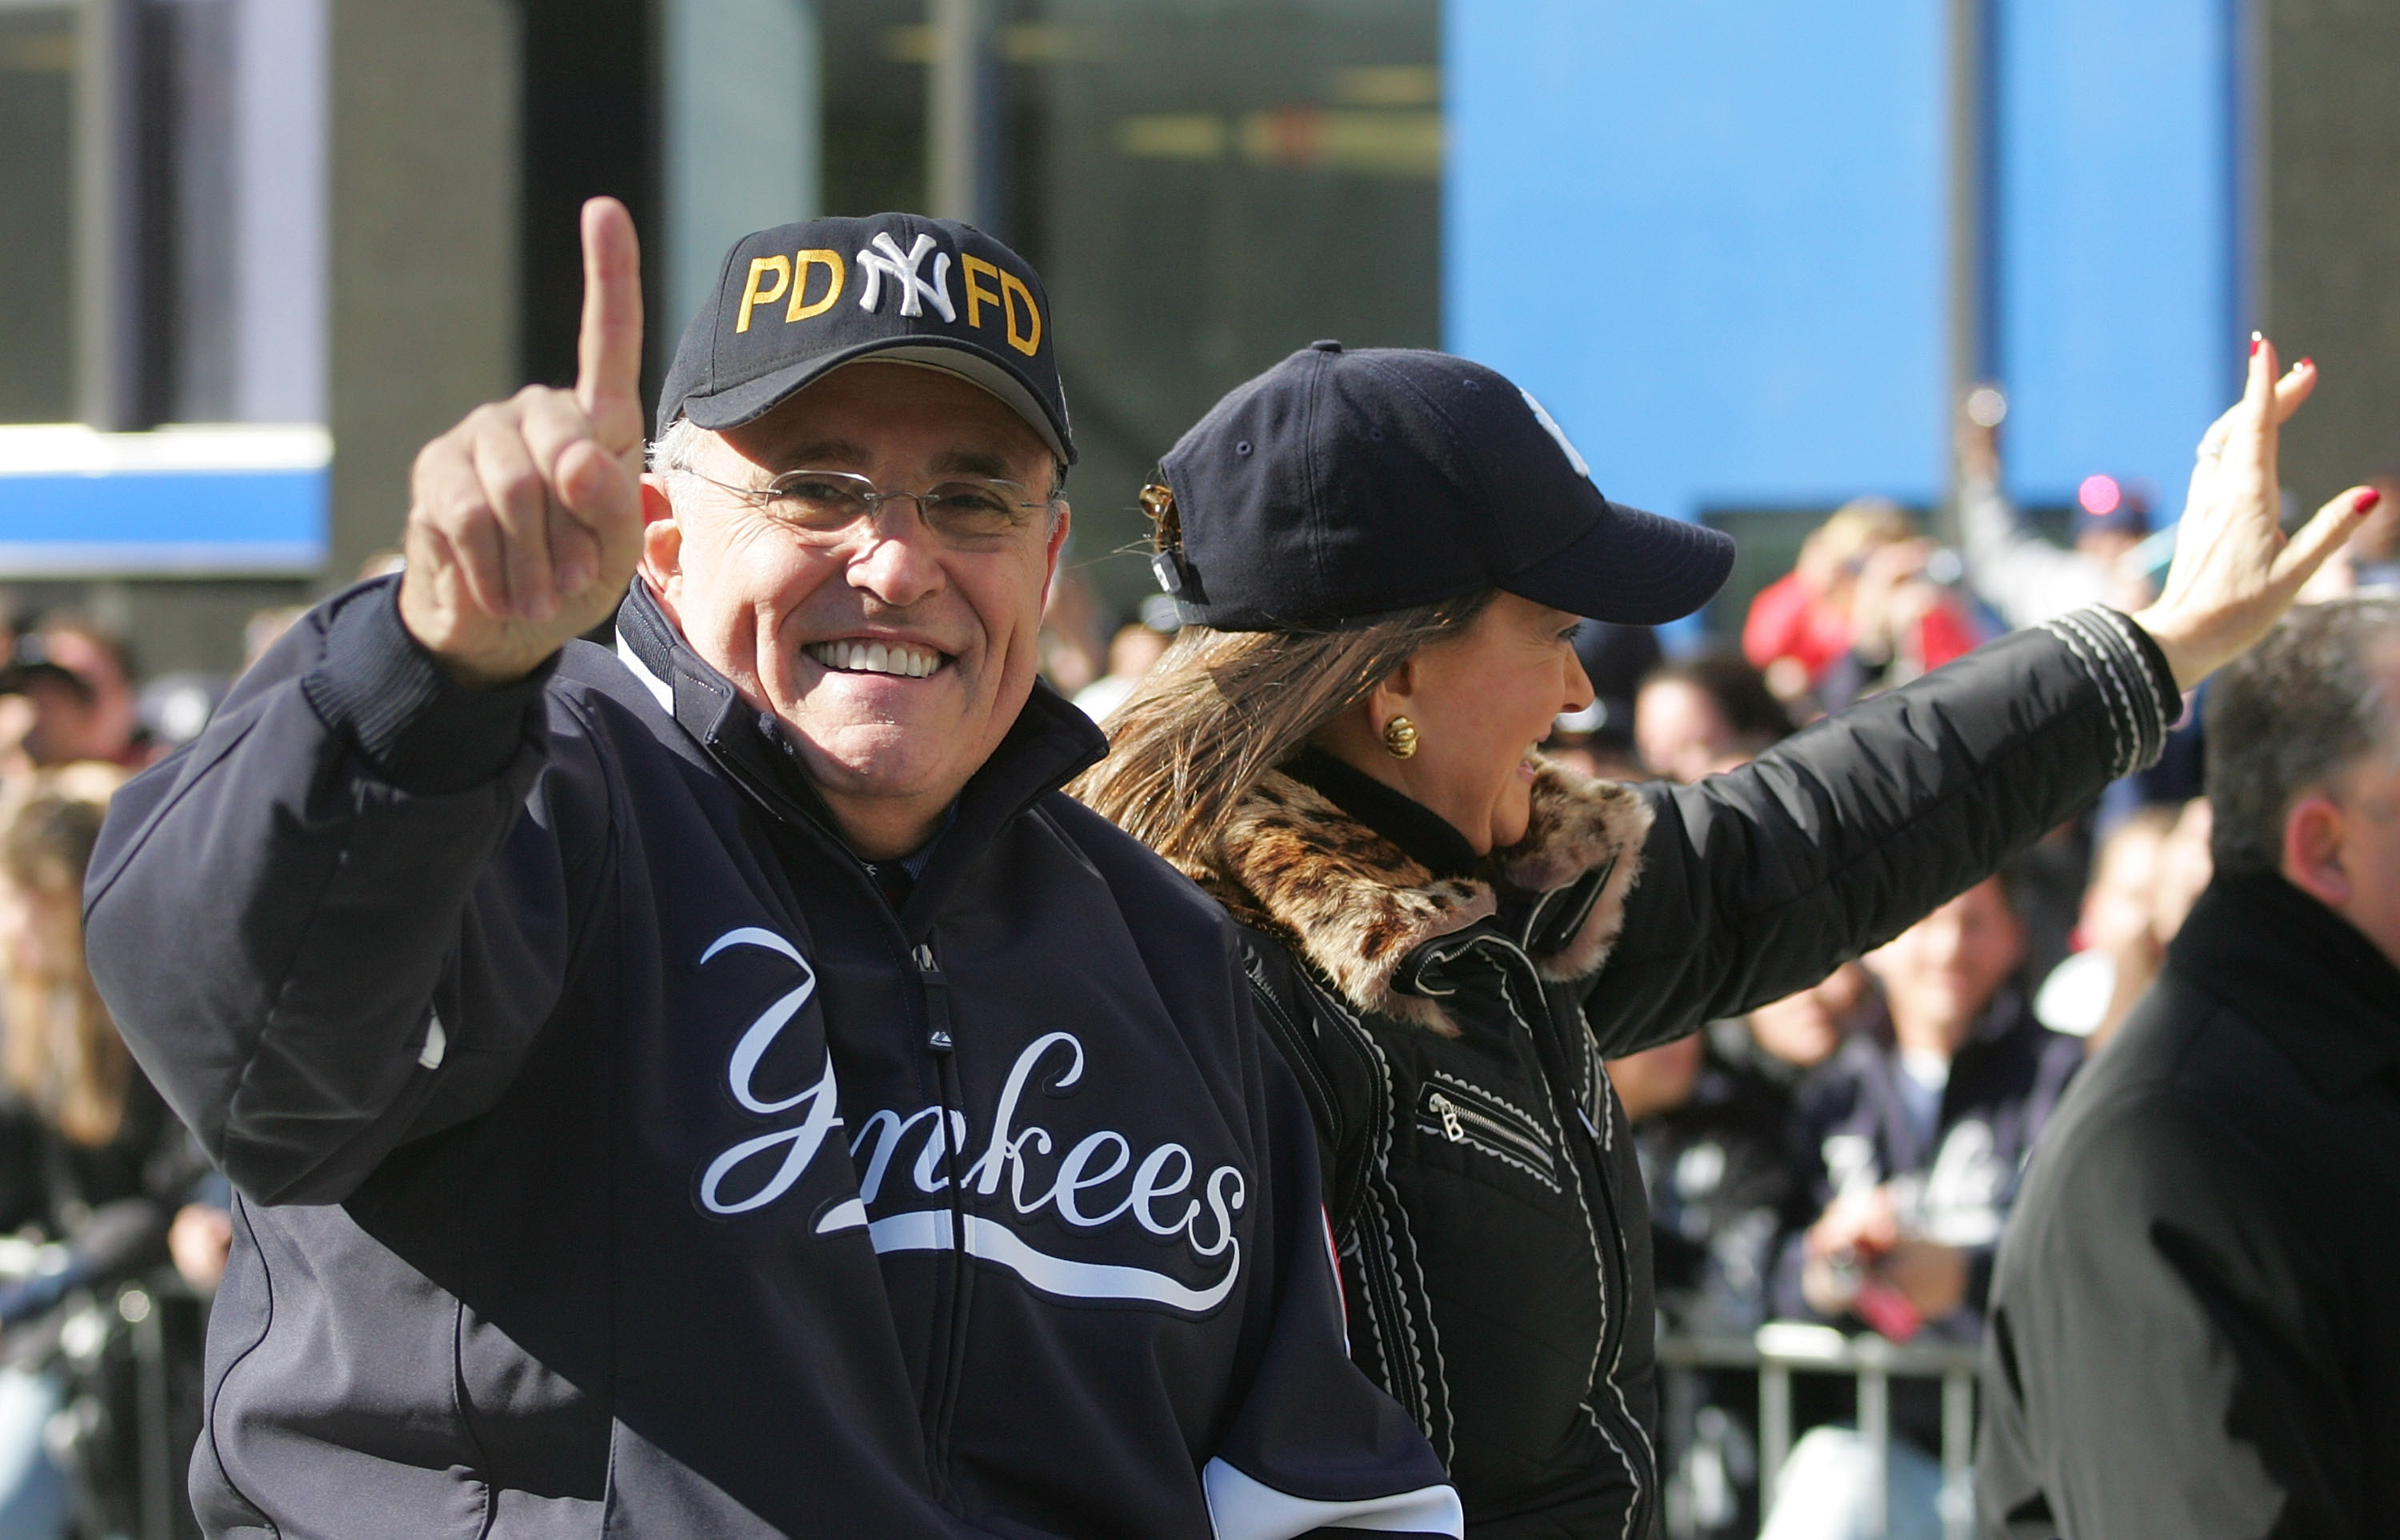 NEW YORK - NOVEMBER 06:  Former New York City Mayor Rudy Giuliani celebrates during the New York Yankees World Series Victory Parade on November 6, 2009 in New York, New York.  (Photo by Jared Wickerham/Getty Images)